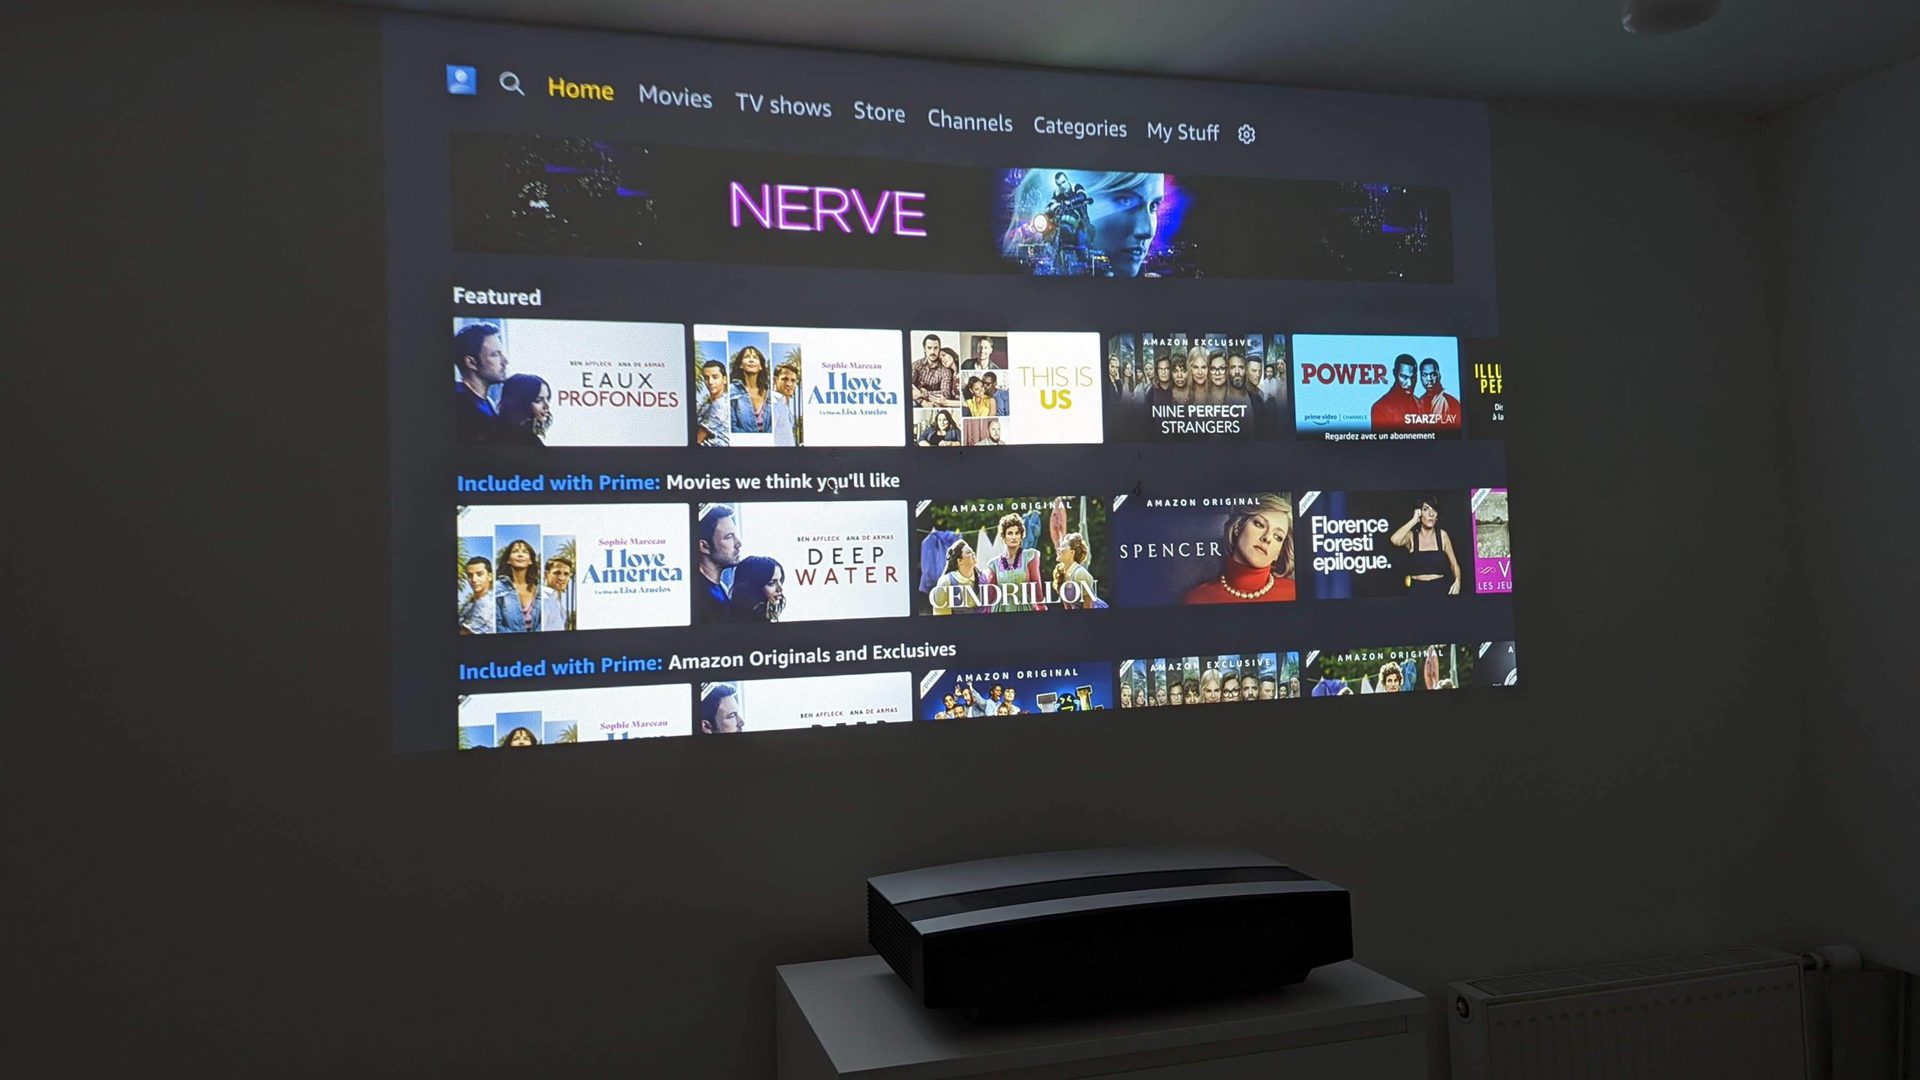 Xgimi Aura projector with projection of Amazon Prime Video